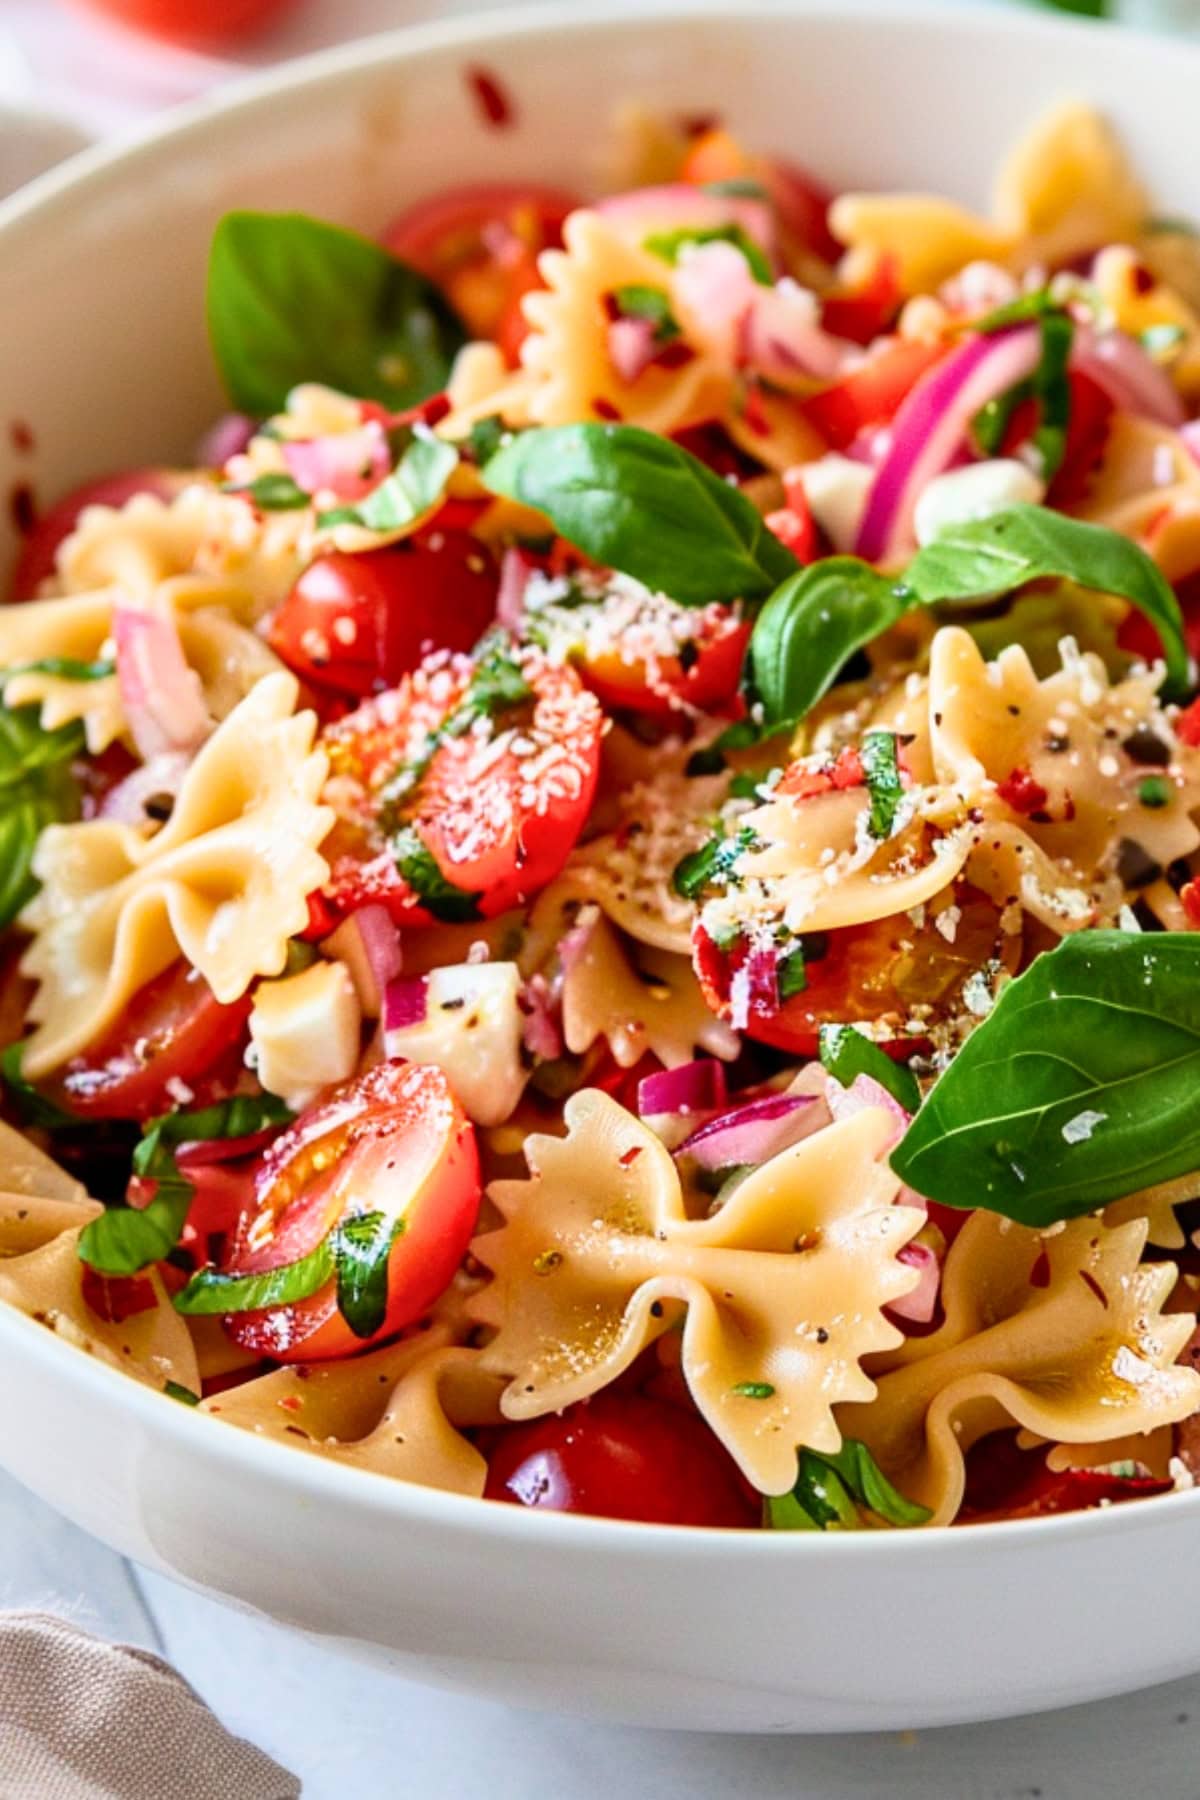 Pasta salad made with  cherry tomatoes, fragrant basil, tangy balsamic vinegar, and creamy mozzarella pearls and bowties pasta served in a white bowl.